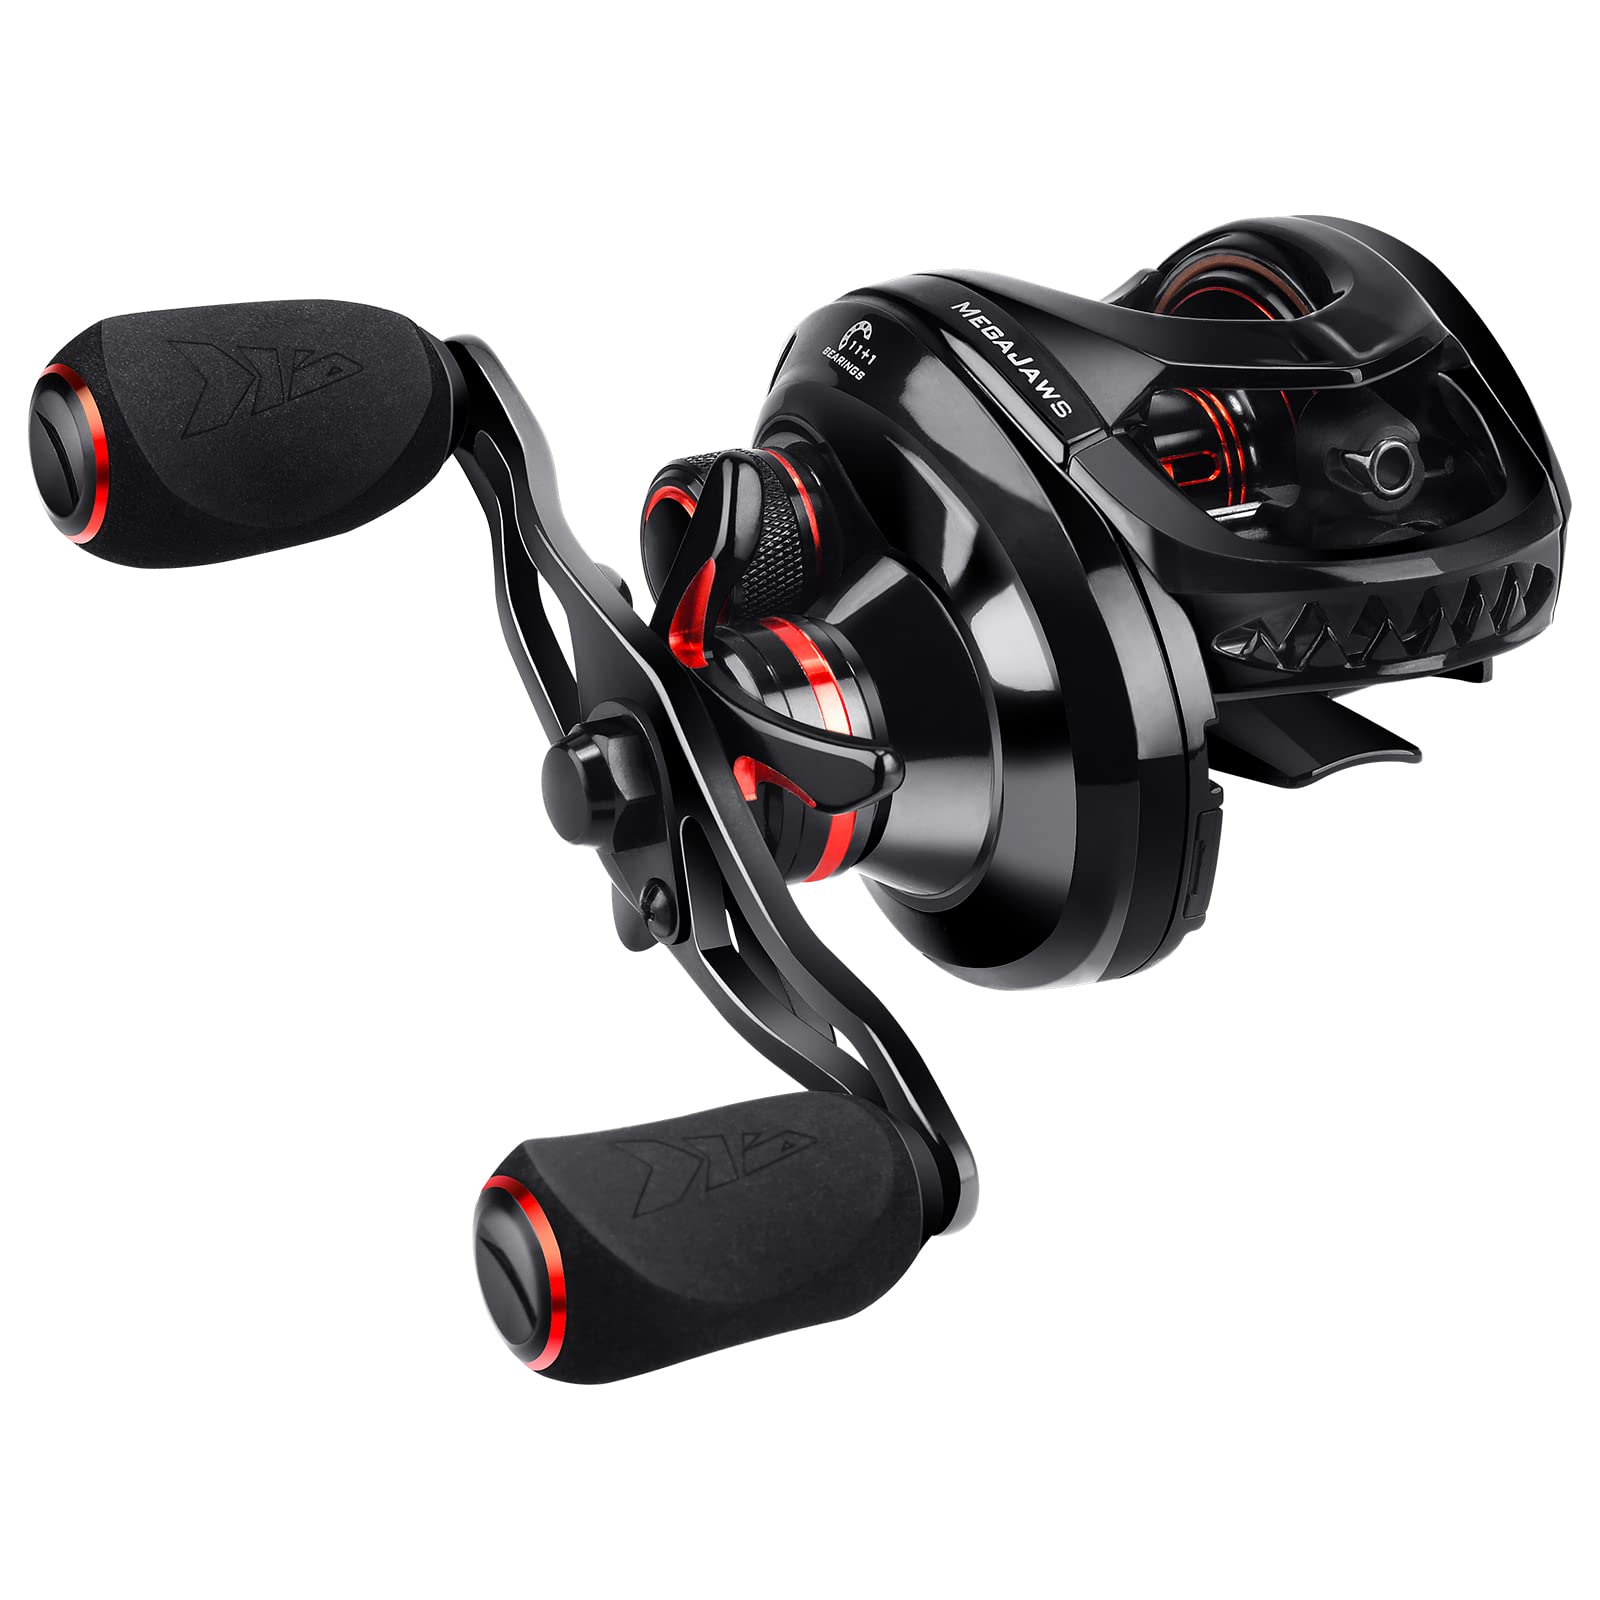 KastKing MegaJaws Baitcasting Fishing Reel, New AutoMag Dual Braking System  Baitcaster Fishing Reel, Only 6.7oz, 17.64 LBs Carbon Fiber Drag, 11+1  Shielded BB, High Speed 5.4:1 to 9.1:1 Gear Ratios A:Right  Handed-Blacktip-7.2:1